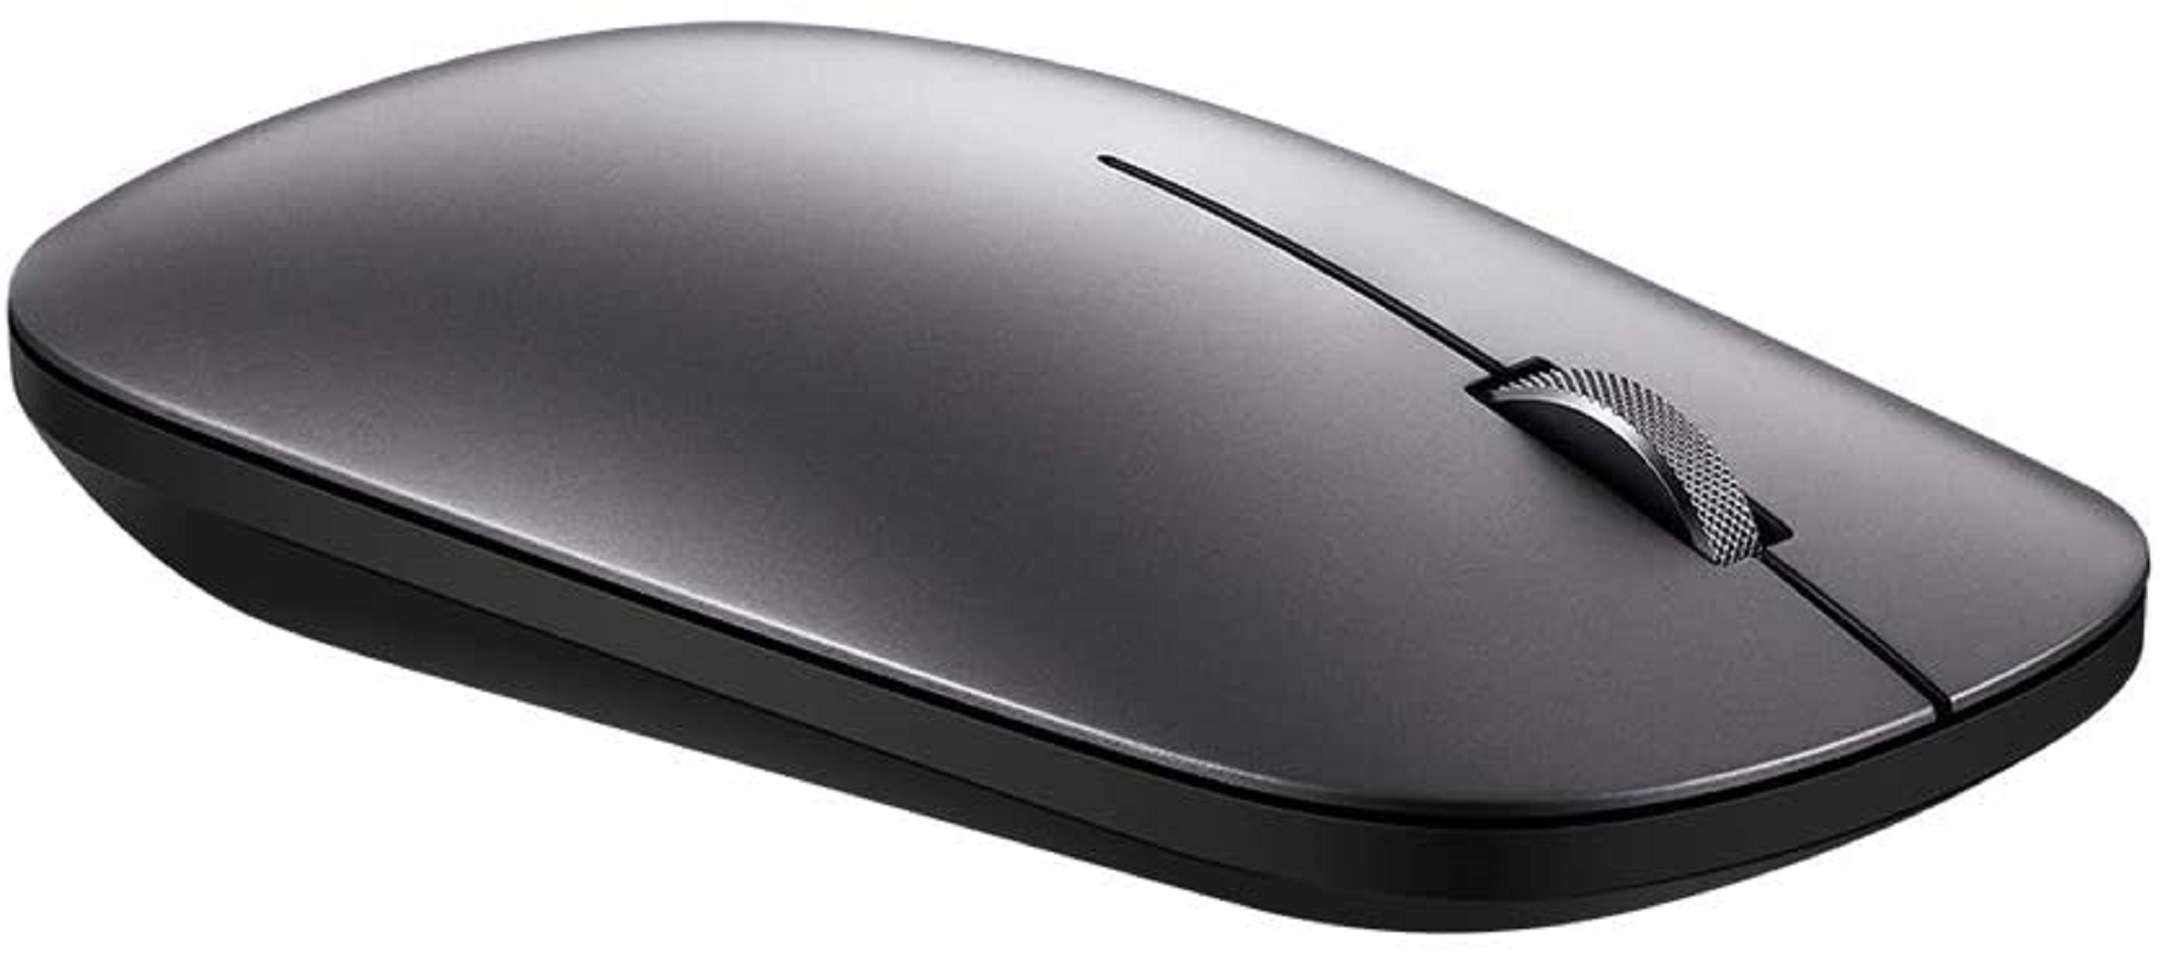 HUAWEI Bluetooth Mouse: elegance and efficiency on offer on Amazon